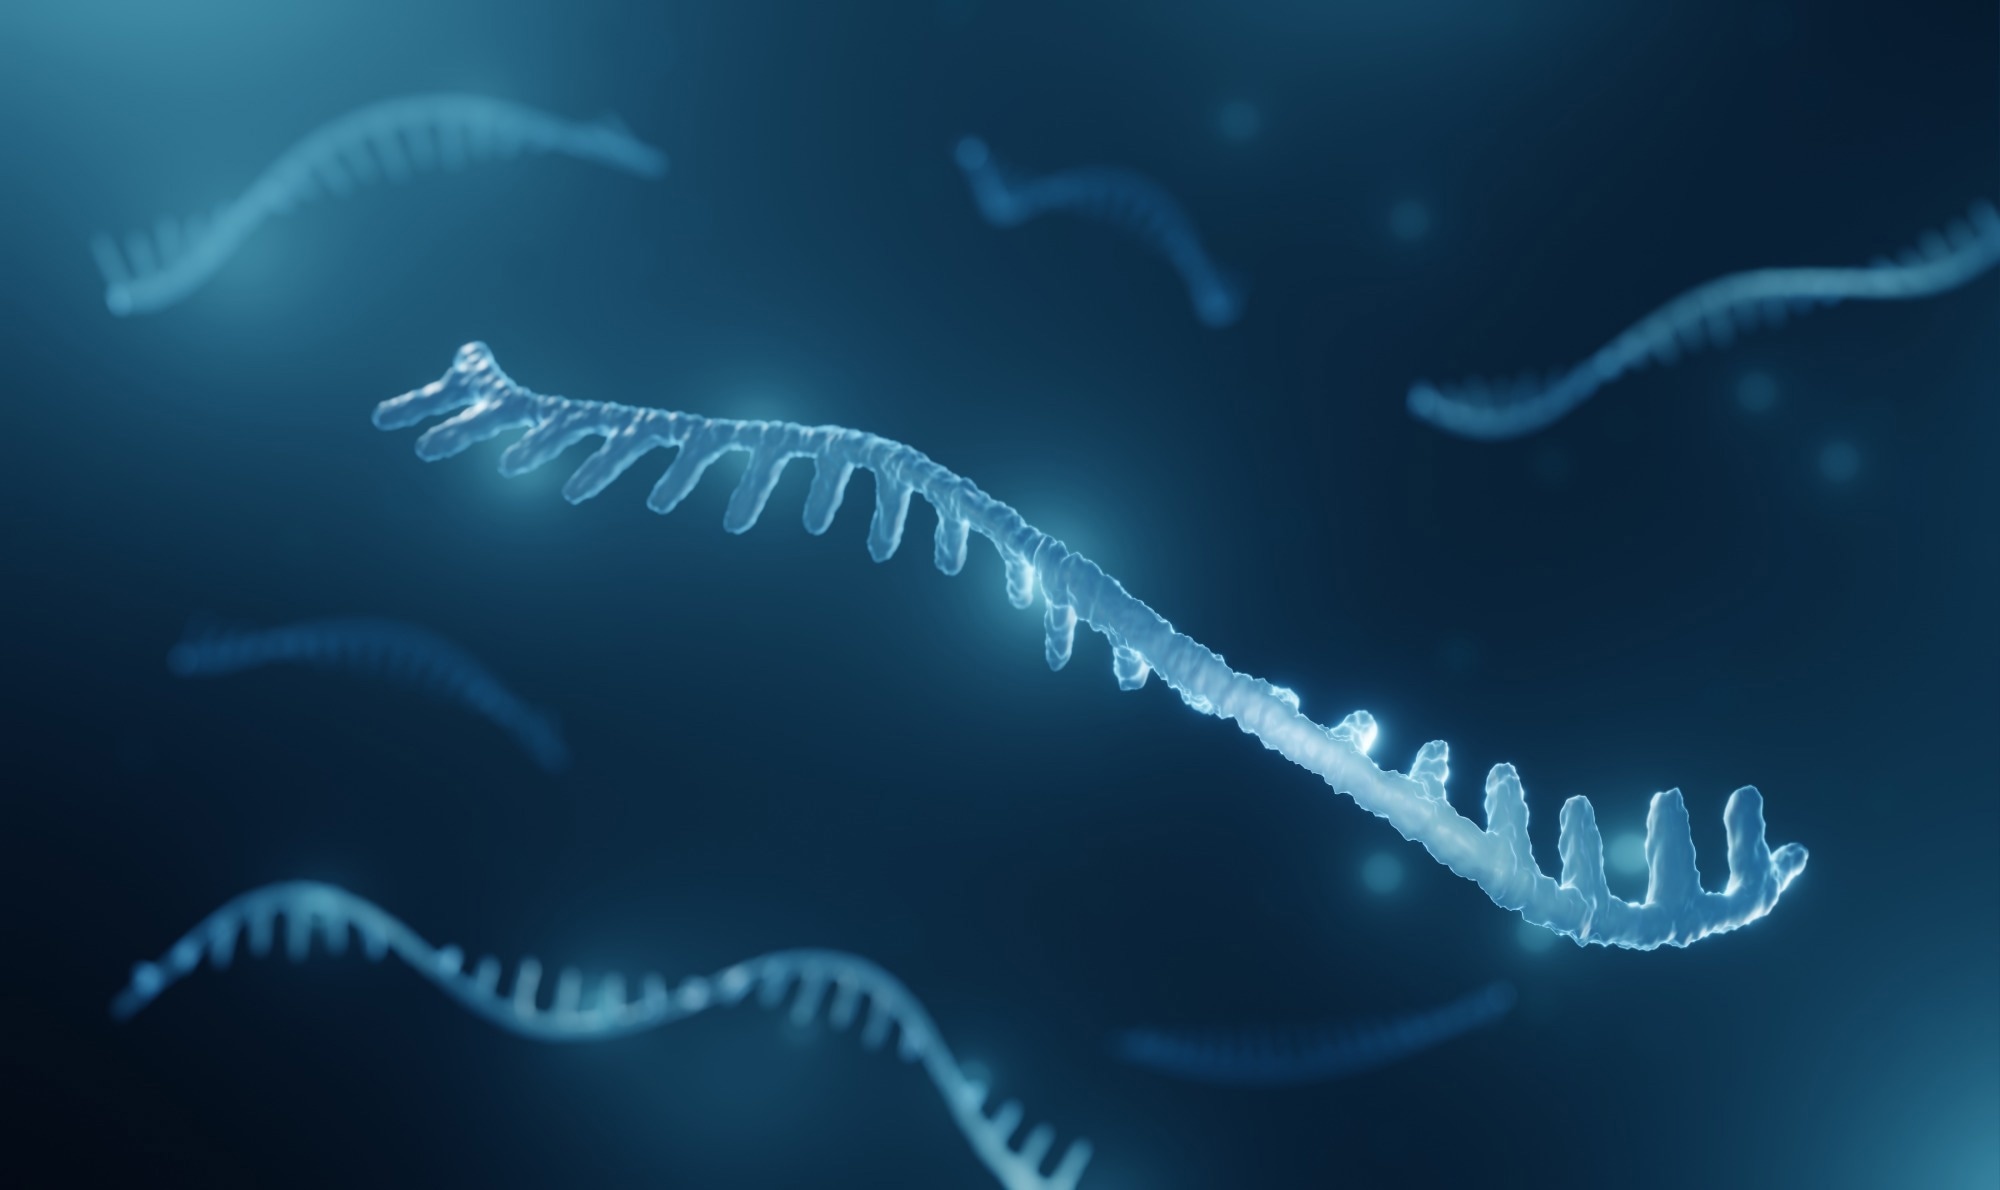 Study: Genetic Loss of miR-205 Causes Increased Mammary Gland Development. Image Credit: ART-ur / Shutterstock